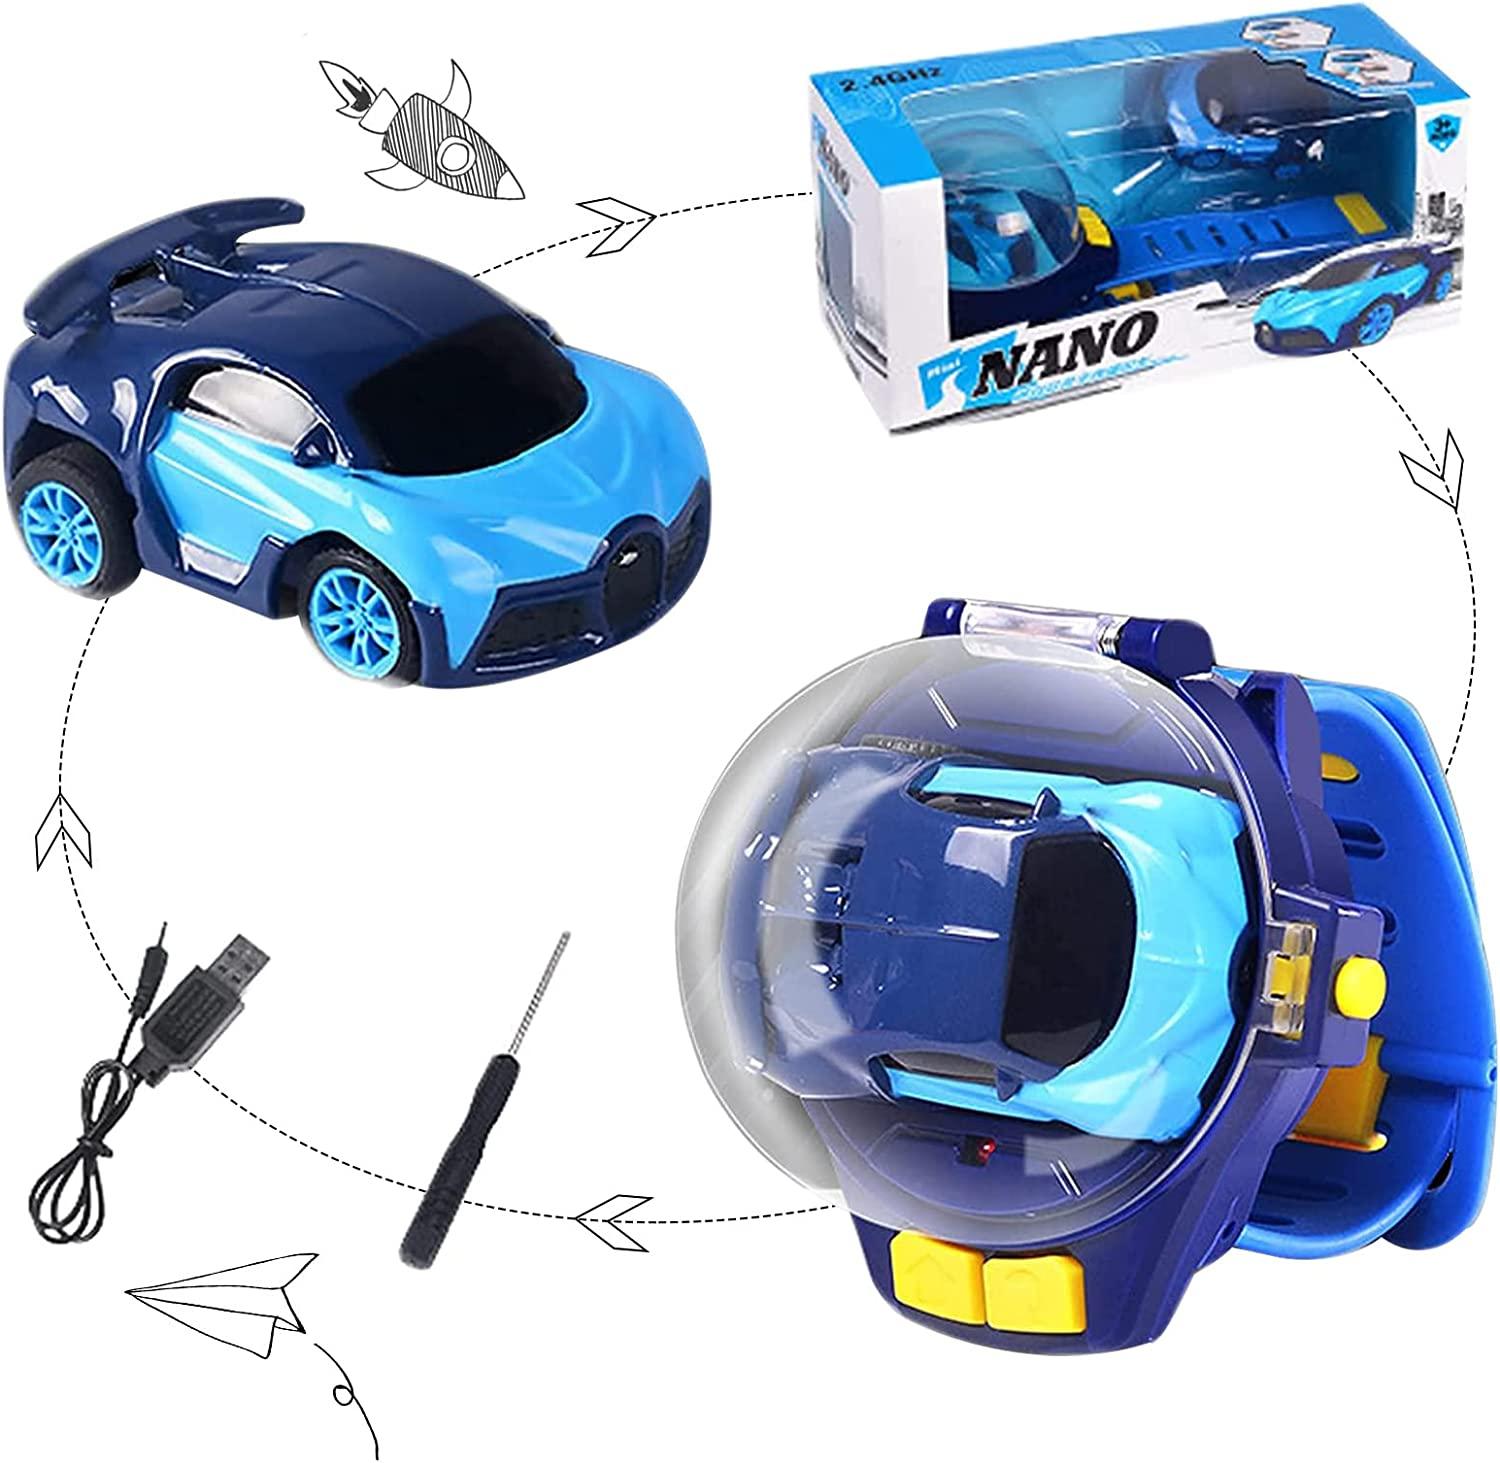 Watch Rc Car: Limited edition and rare watch RC cars are highly sought after by collectors.